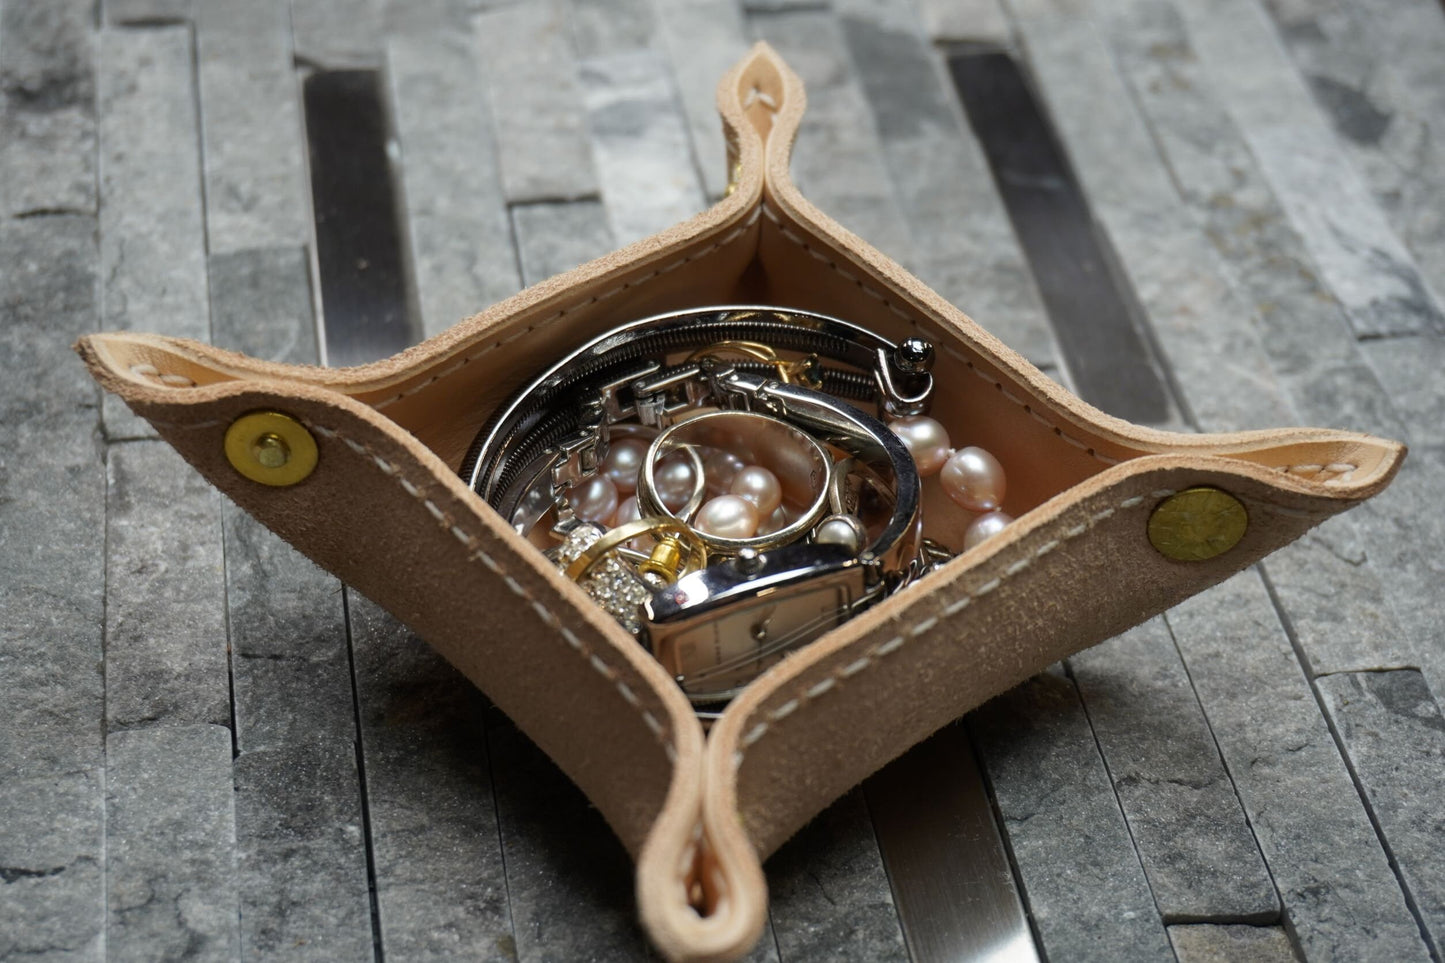  OARIE X-Small Size Jewelry Tray, Vintage Valet Tray PU